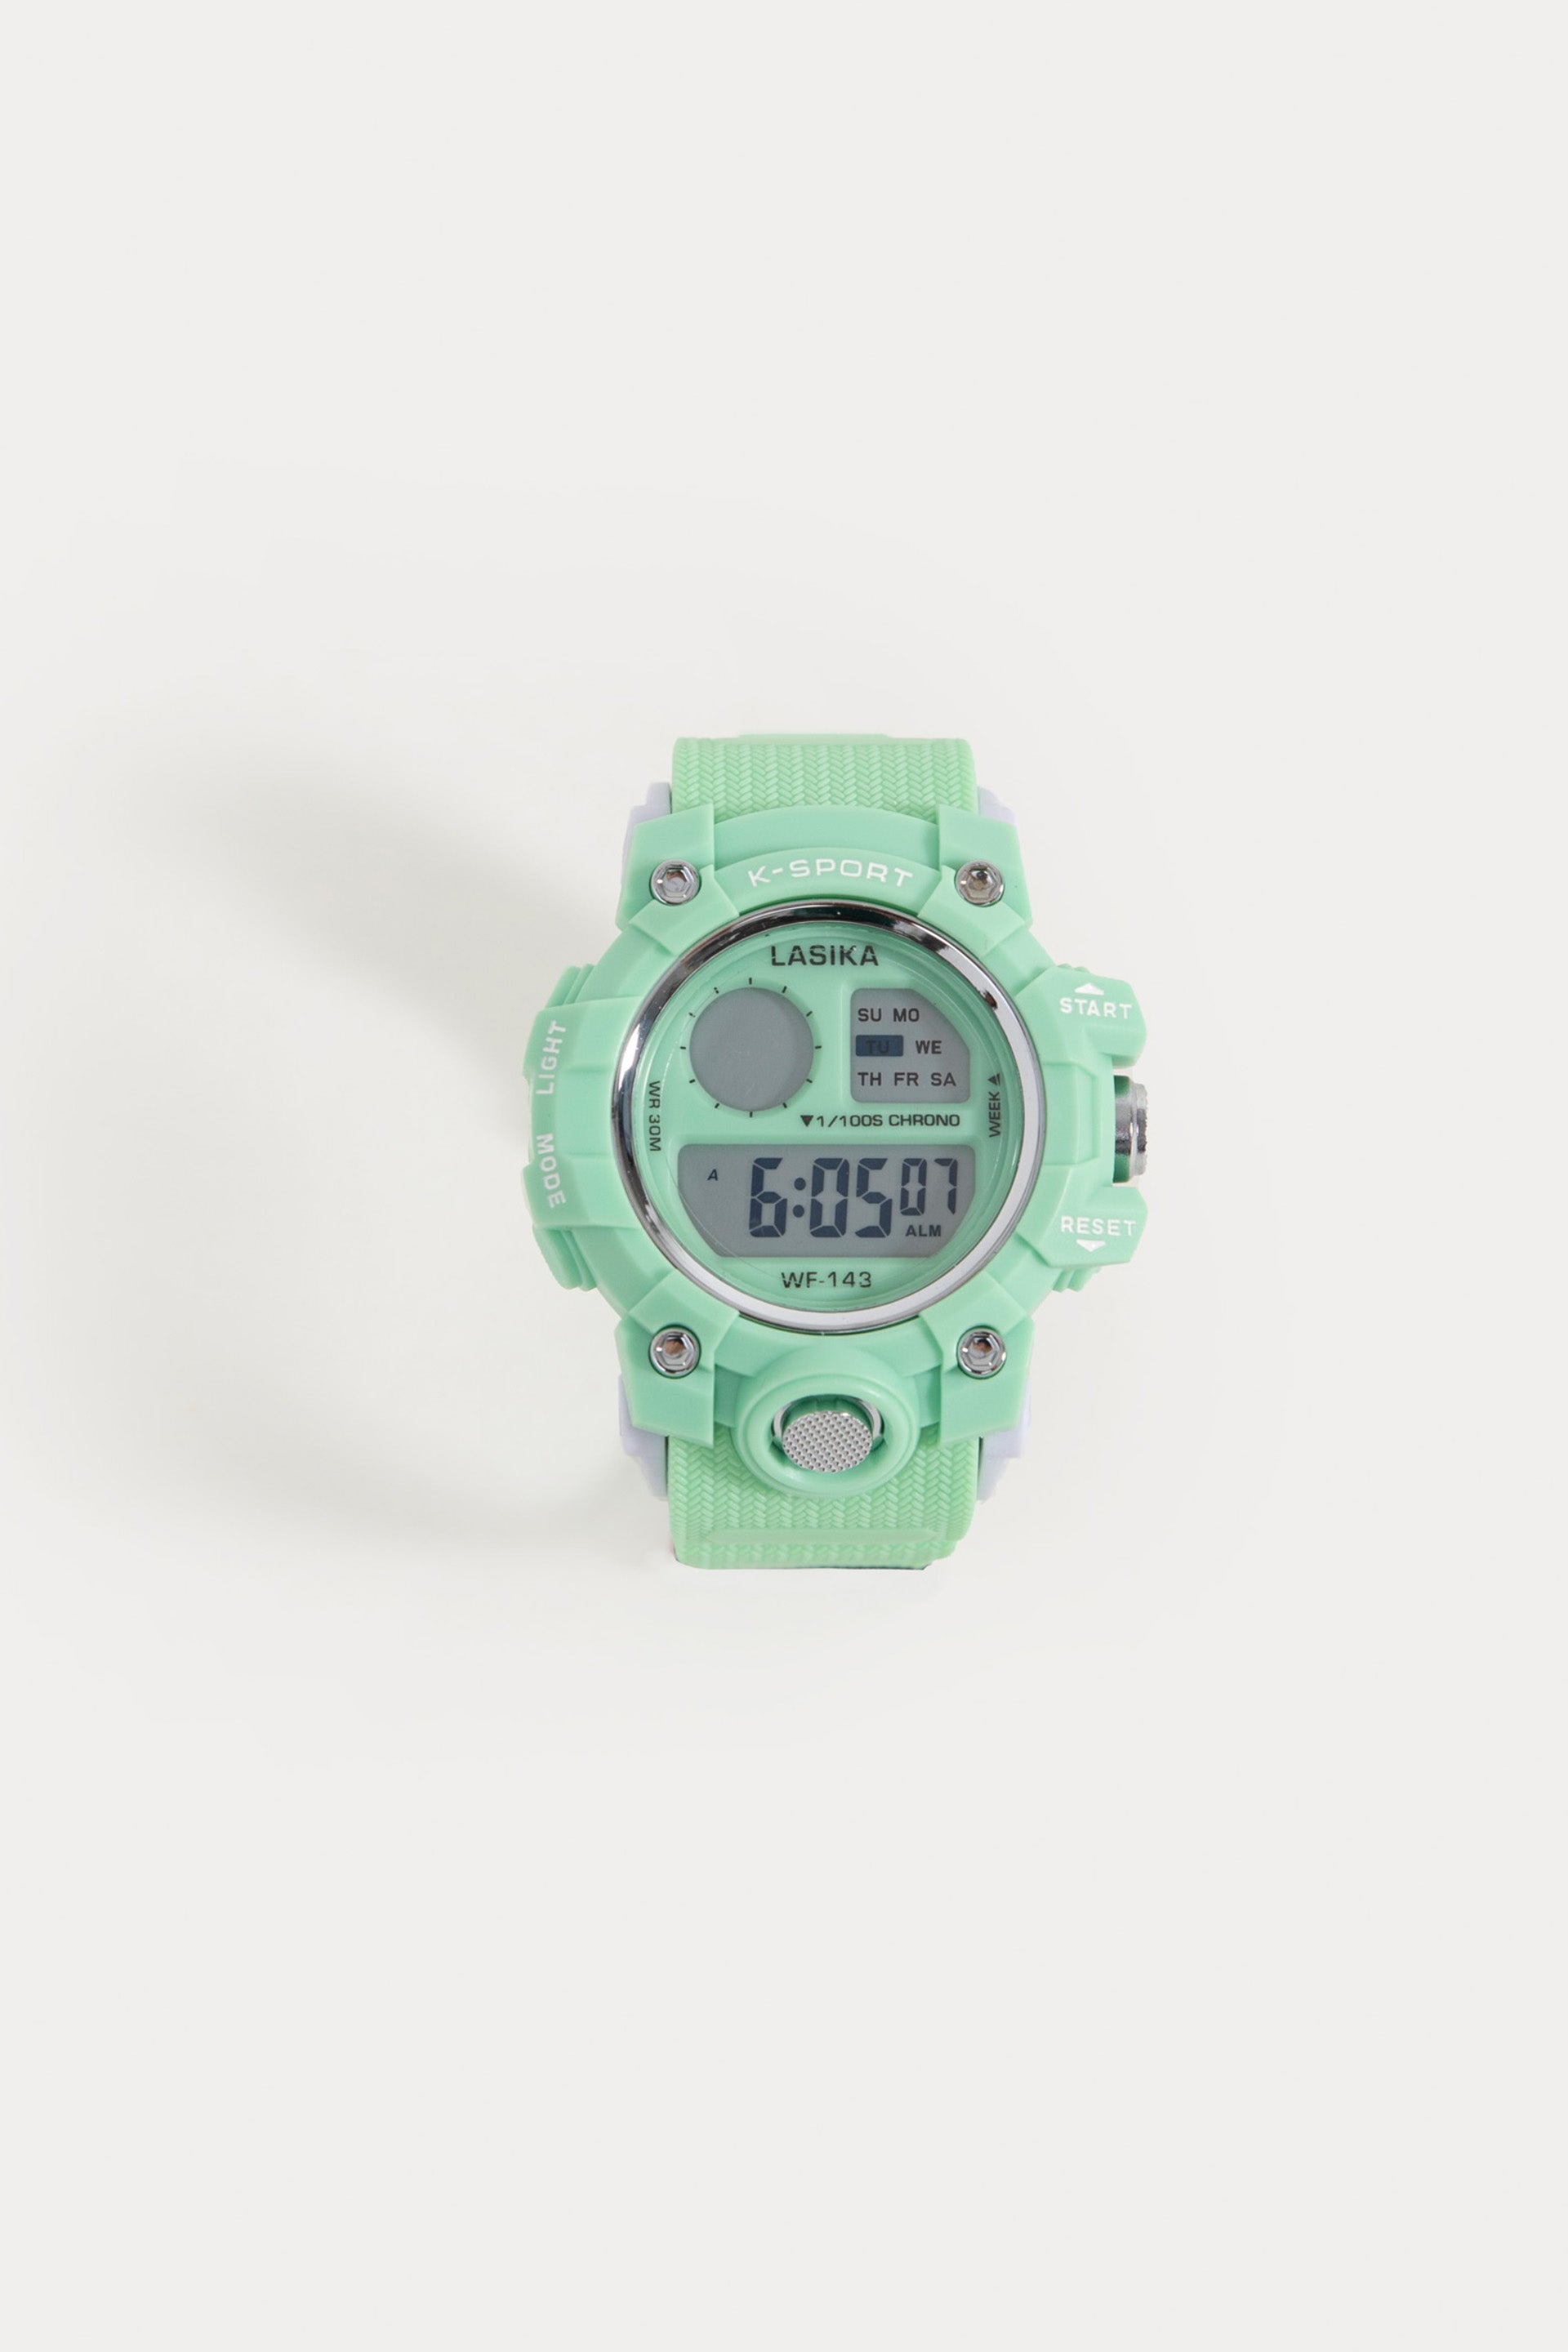 Urban Outfitters Mesh Band Digital Watch | Mesh band, Watches, Digital watch